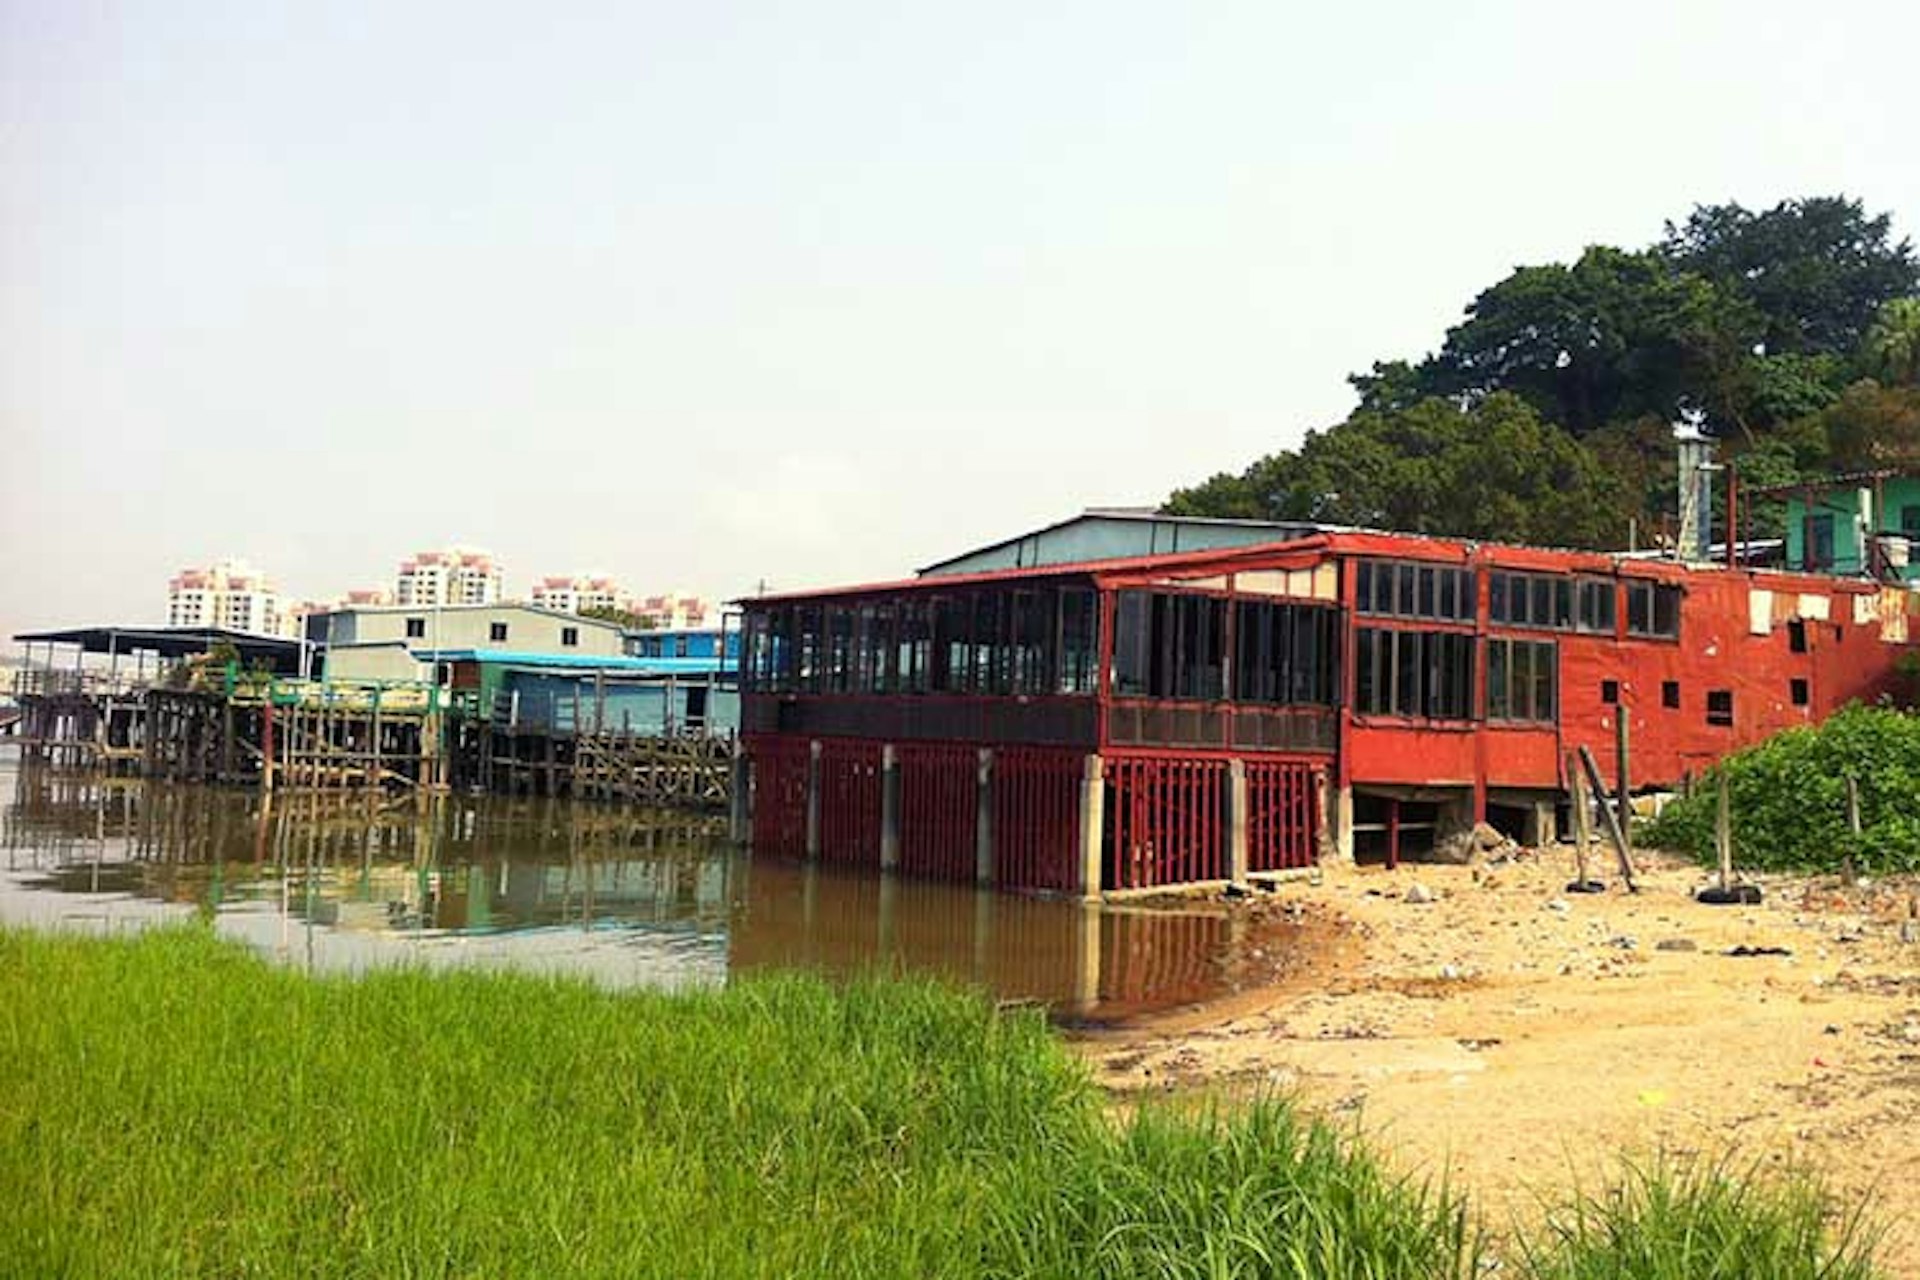 Stilt houses of Coloane. Image by Piera Chen / Lonely Planet